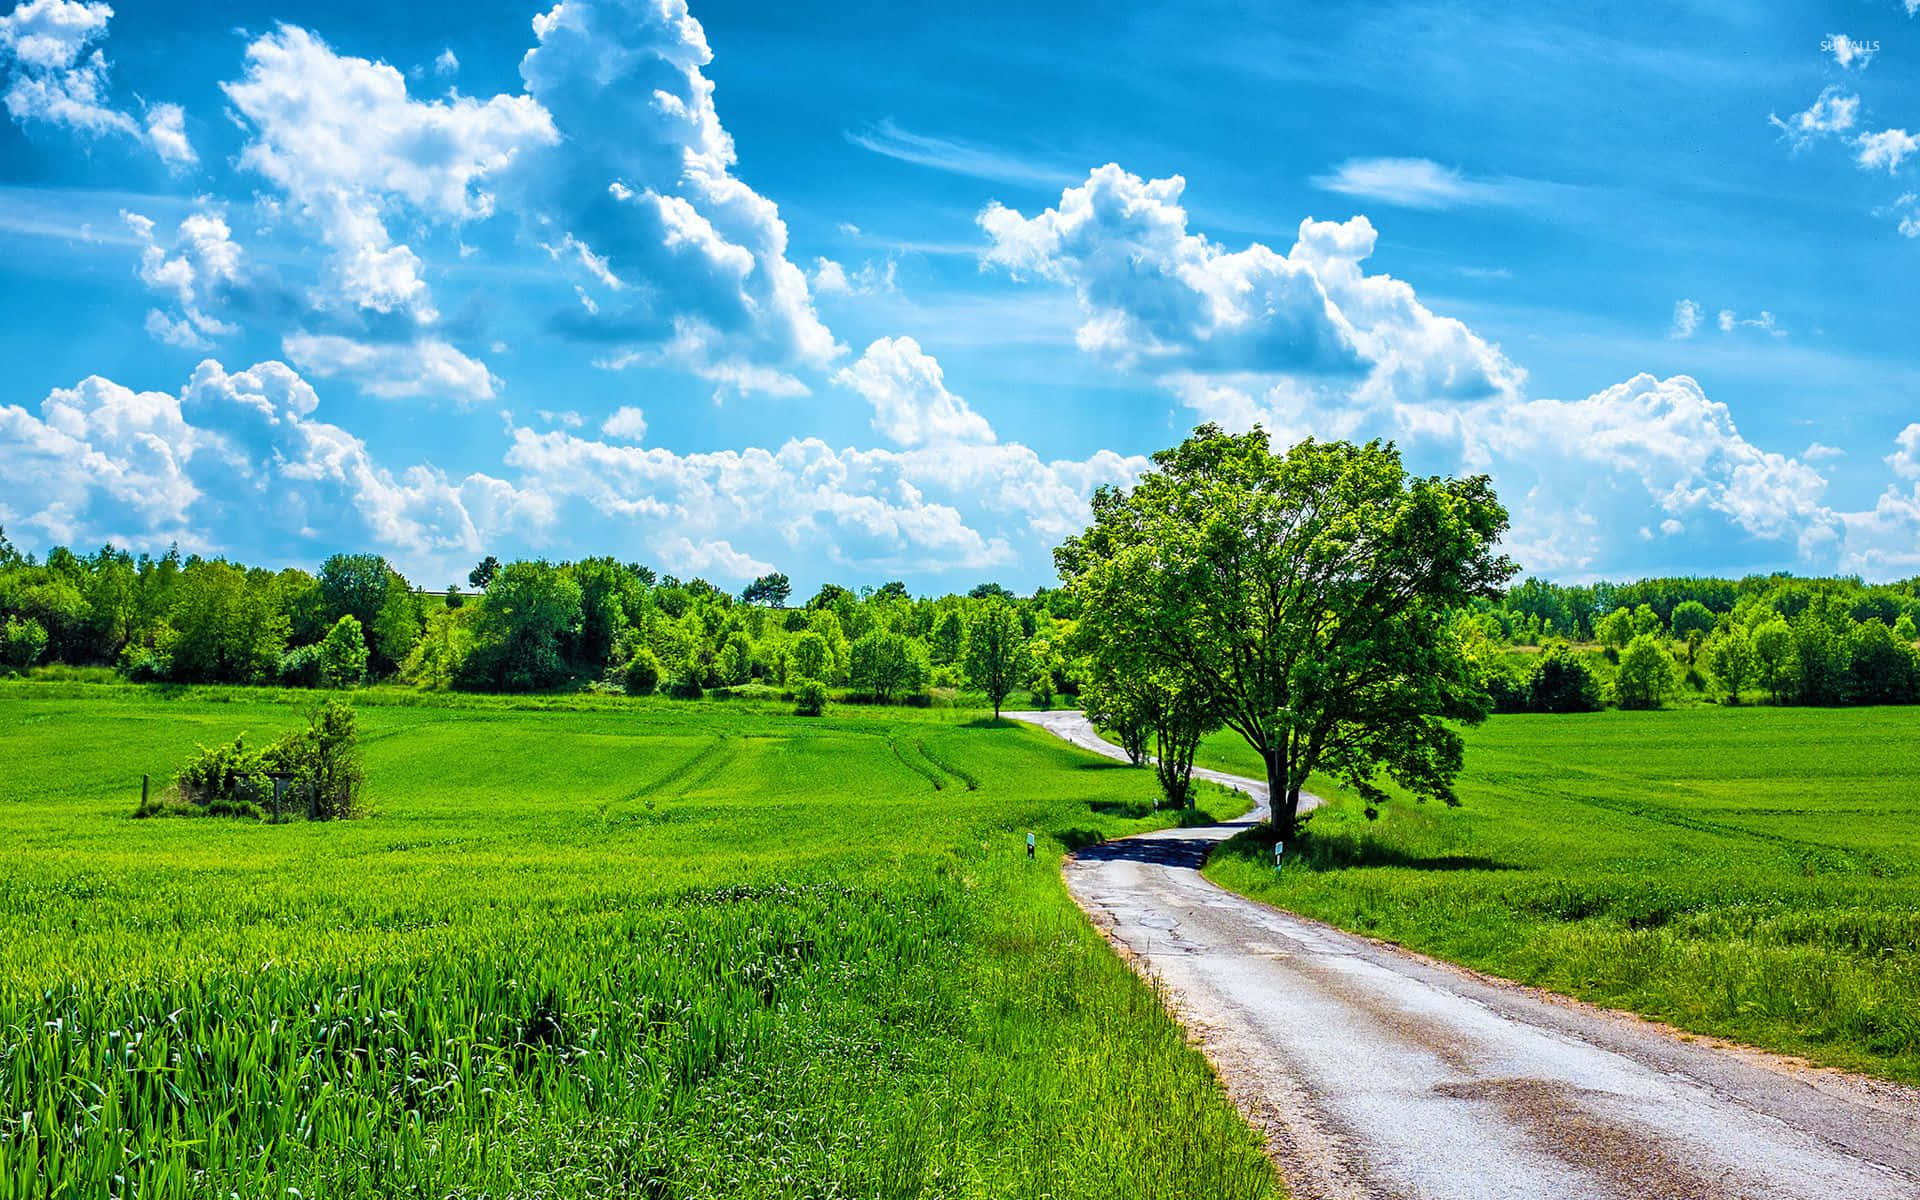 Sunny Country Road Landscape Wallpaper